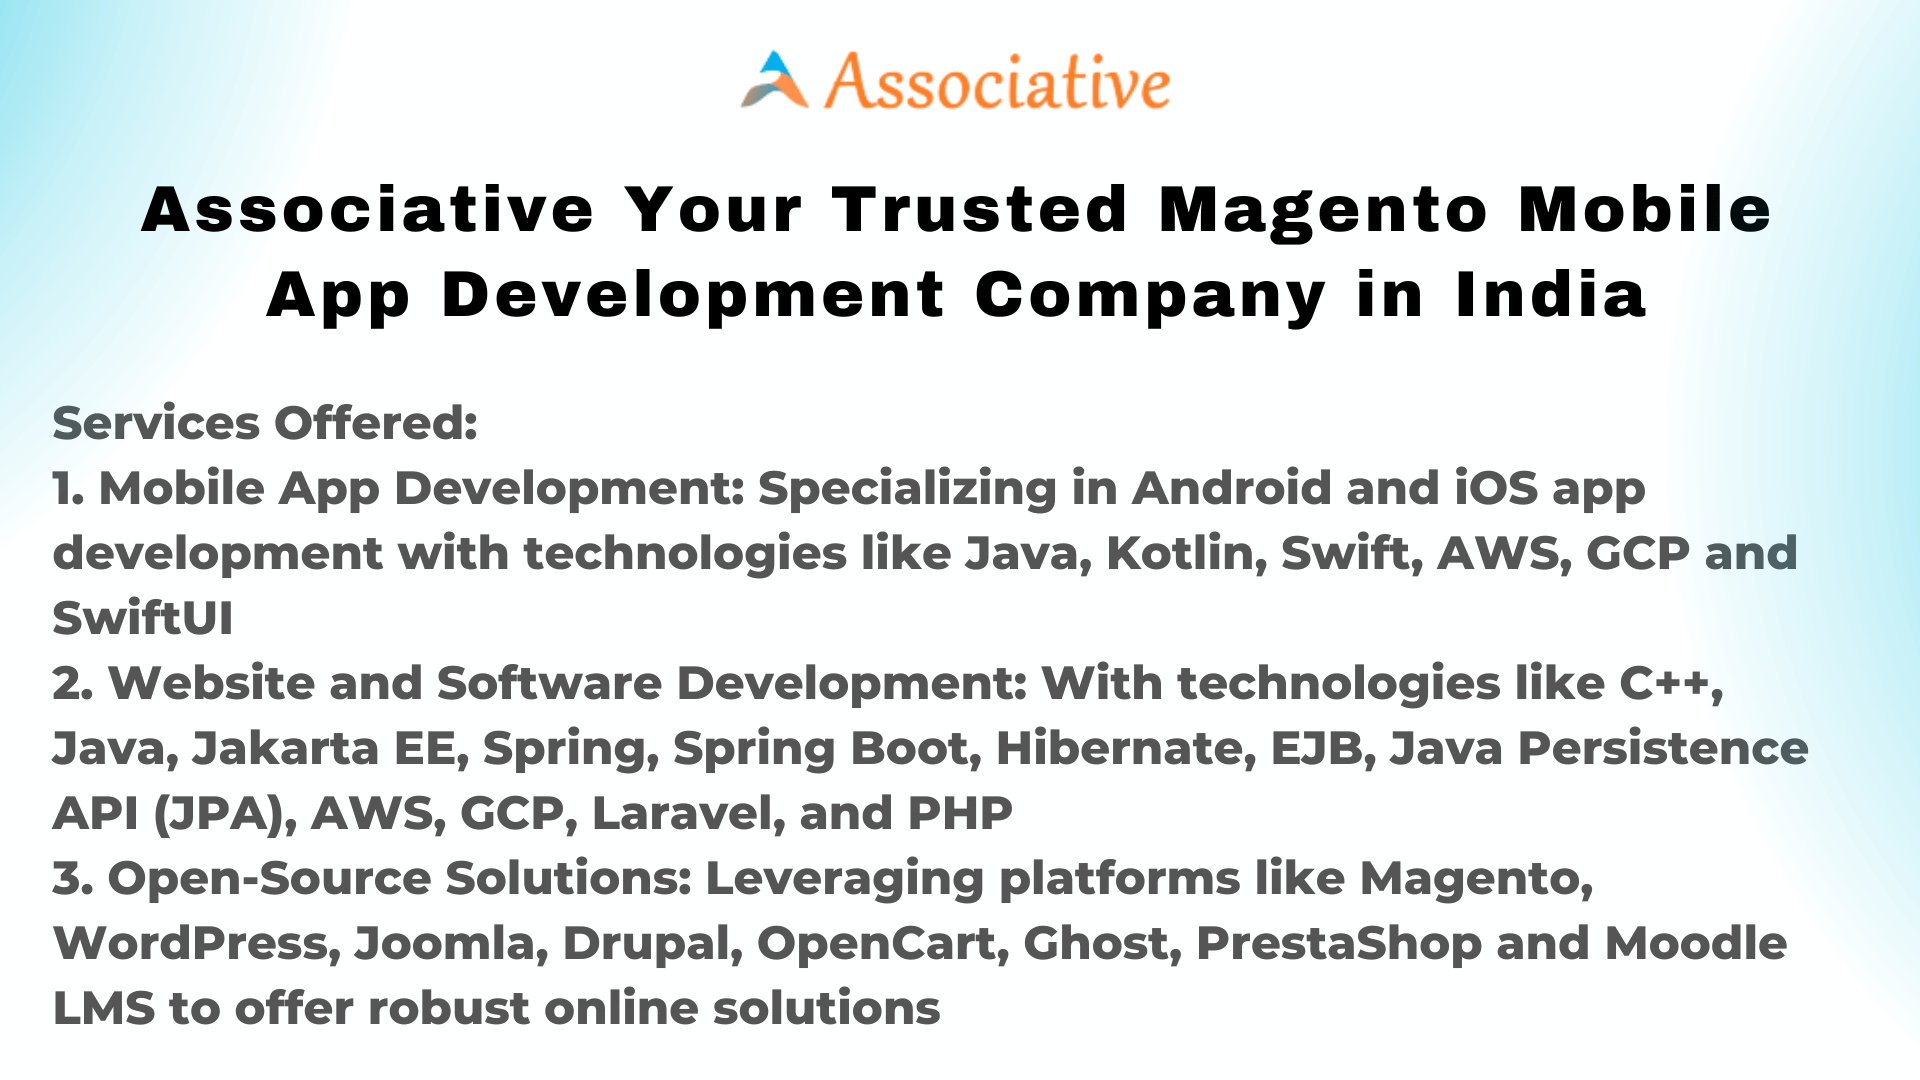 Associative Your Trusted Magento Mobile App Development Company in India